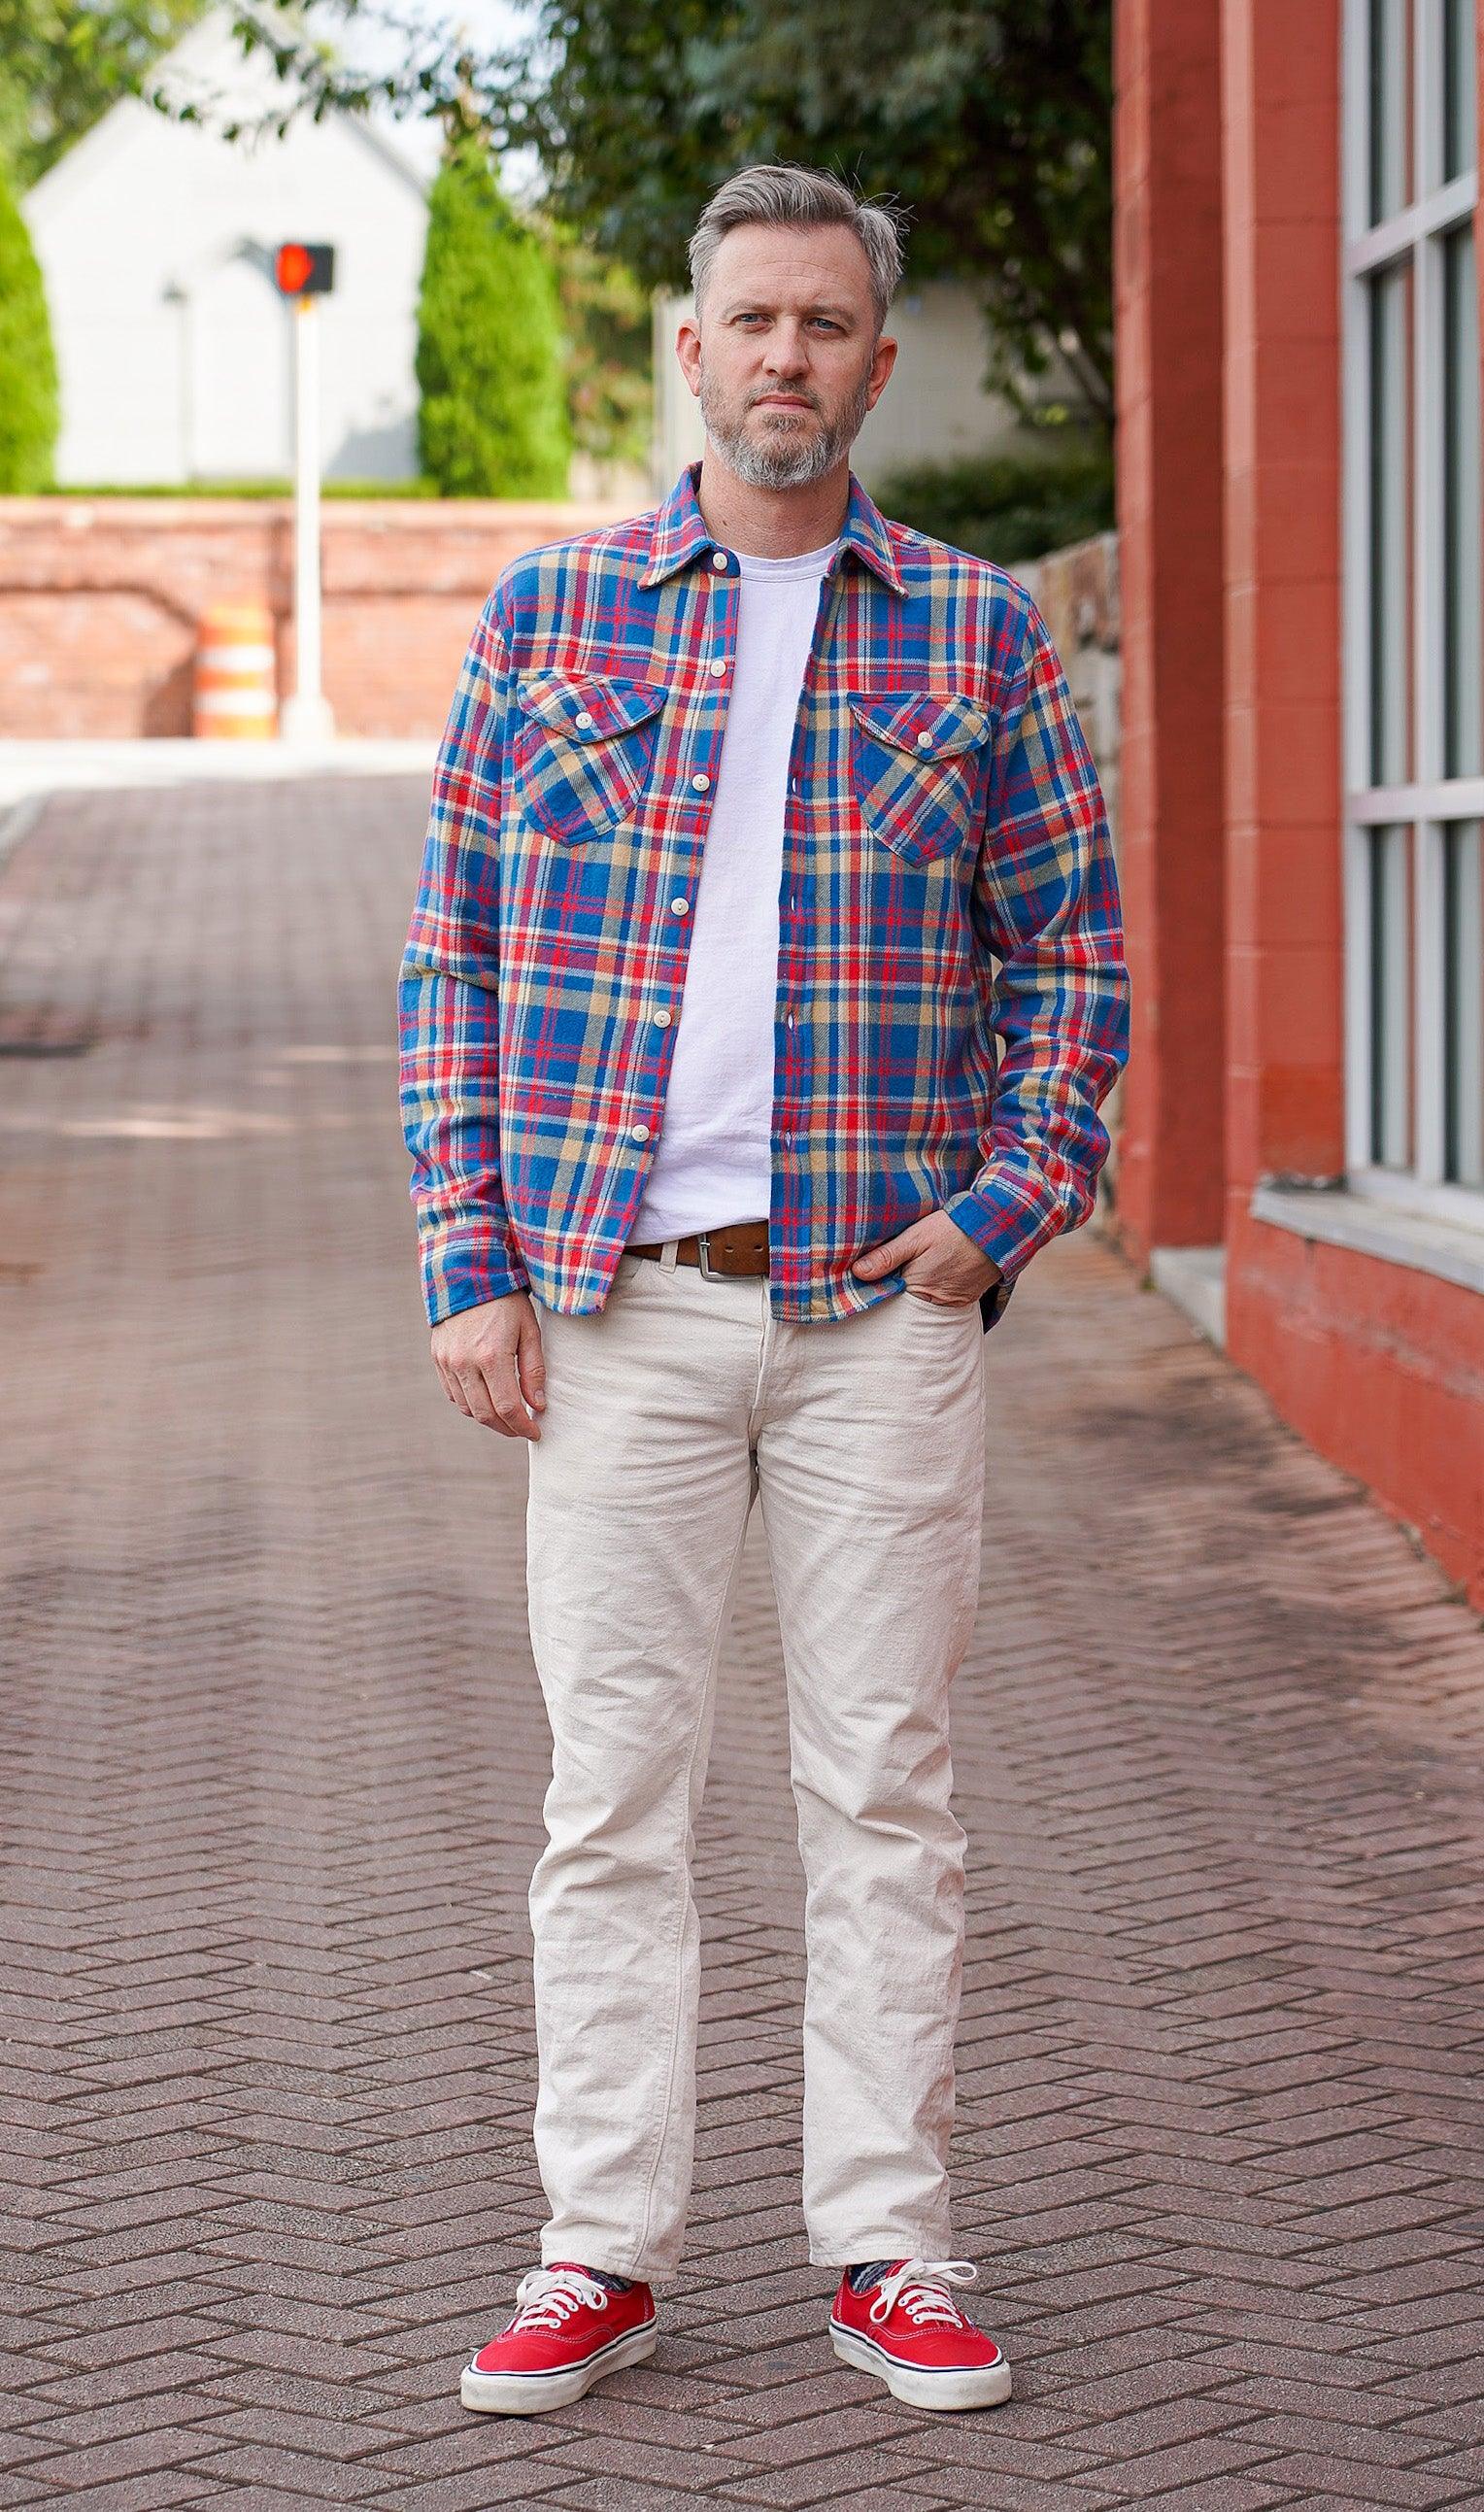 Flannel Workshirt - Northwoods Plaid - Guilty Party